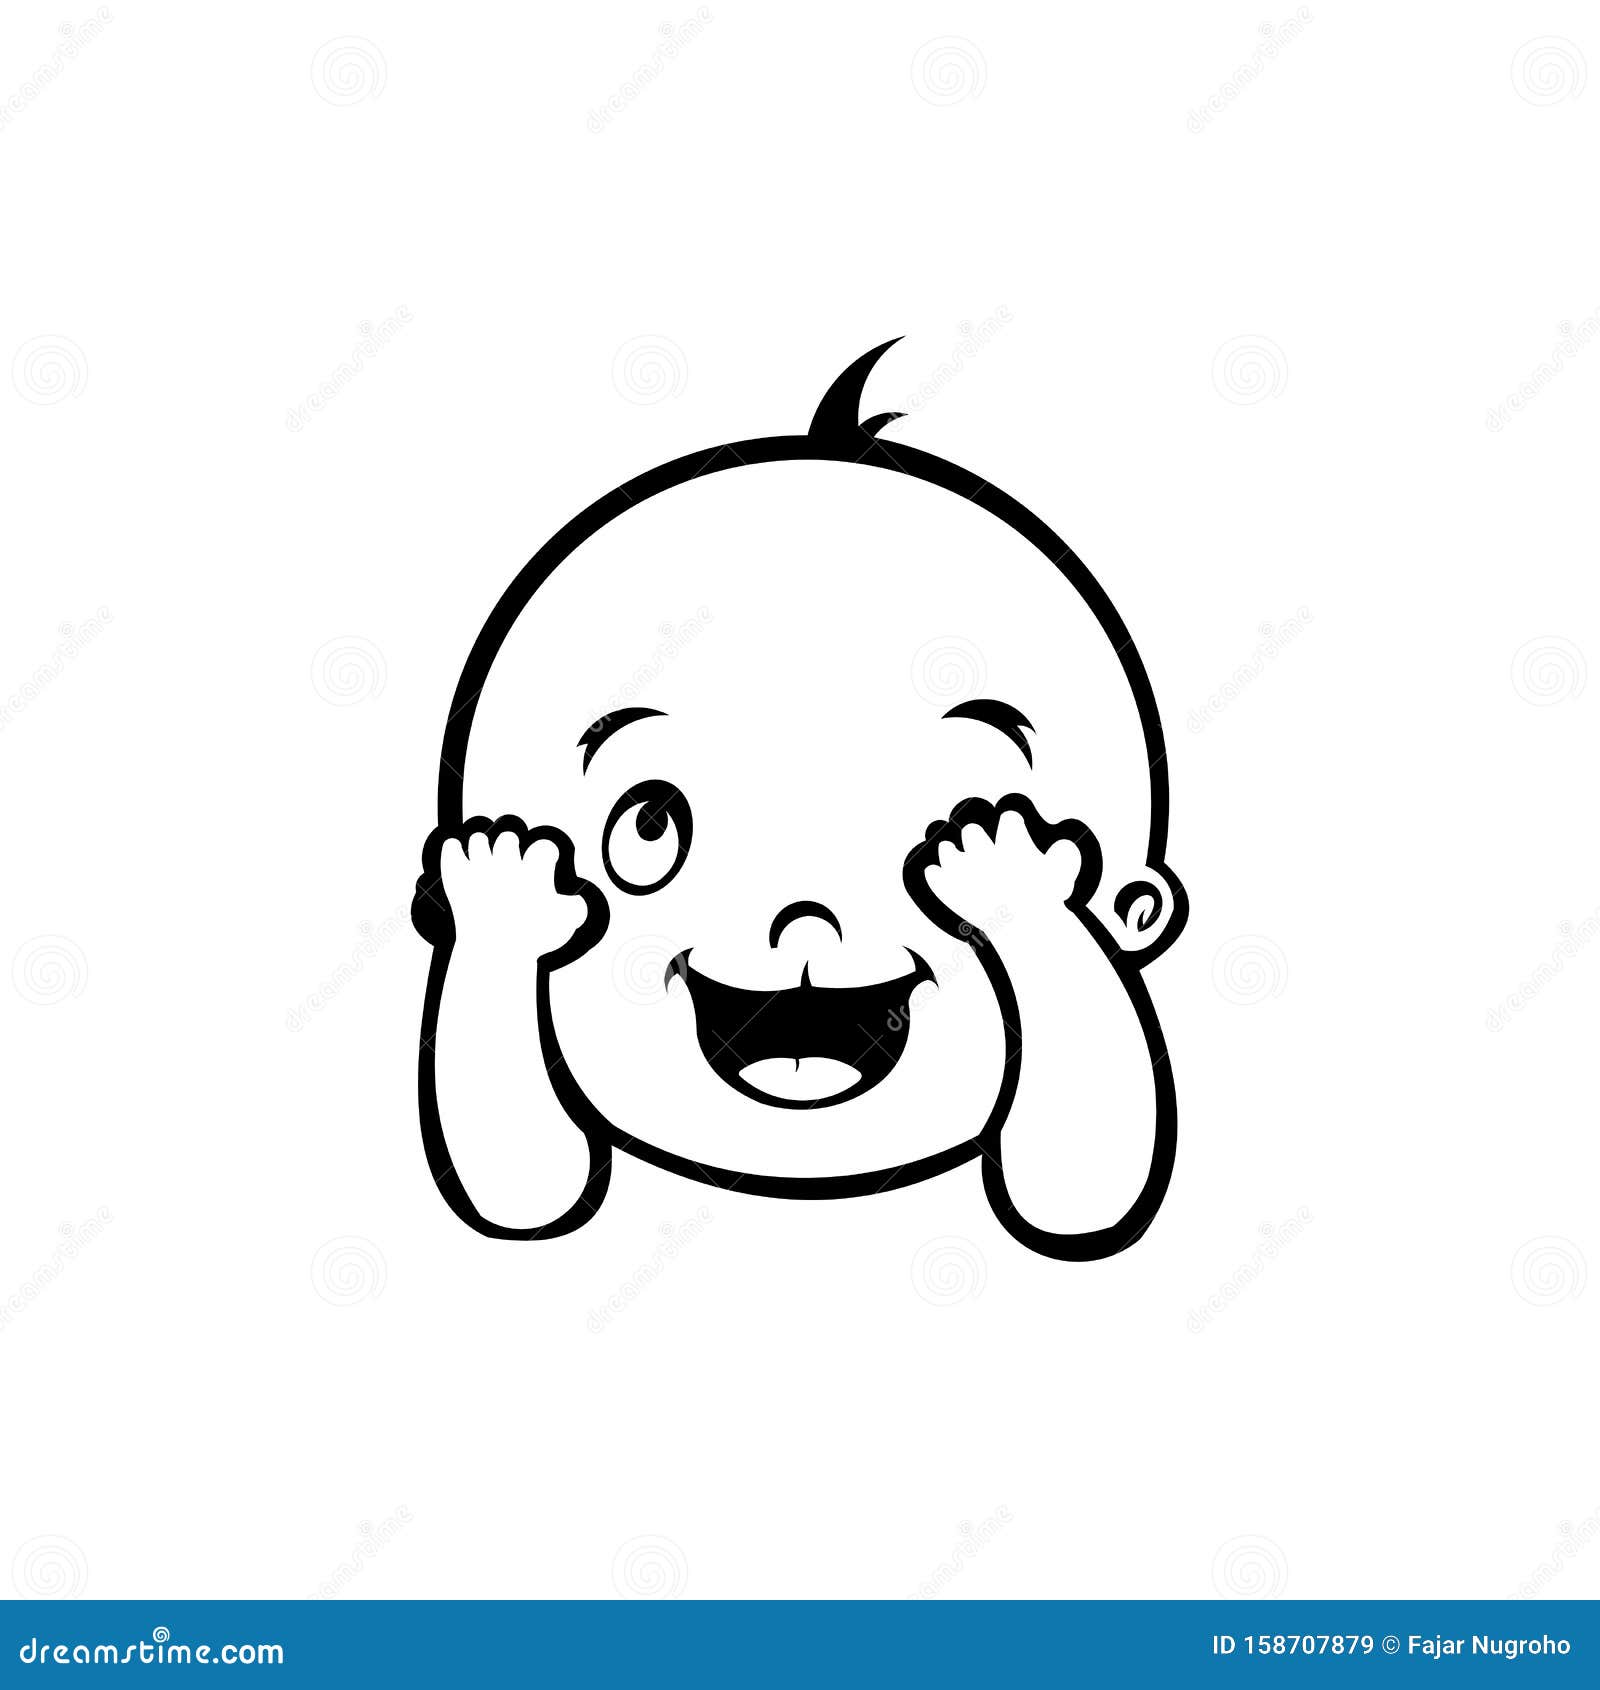 Head Babies Small Baby Boy, Stock Vector - Illustration of care, logotype:  158707879